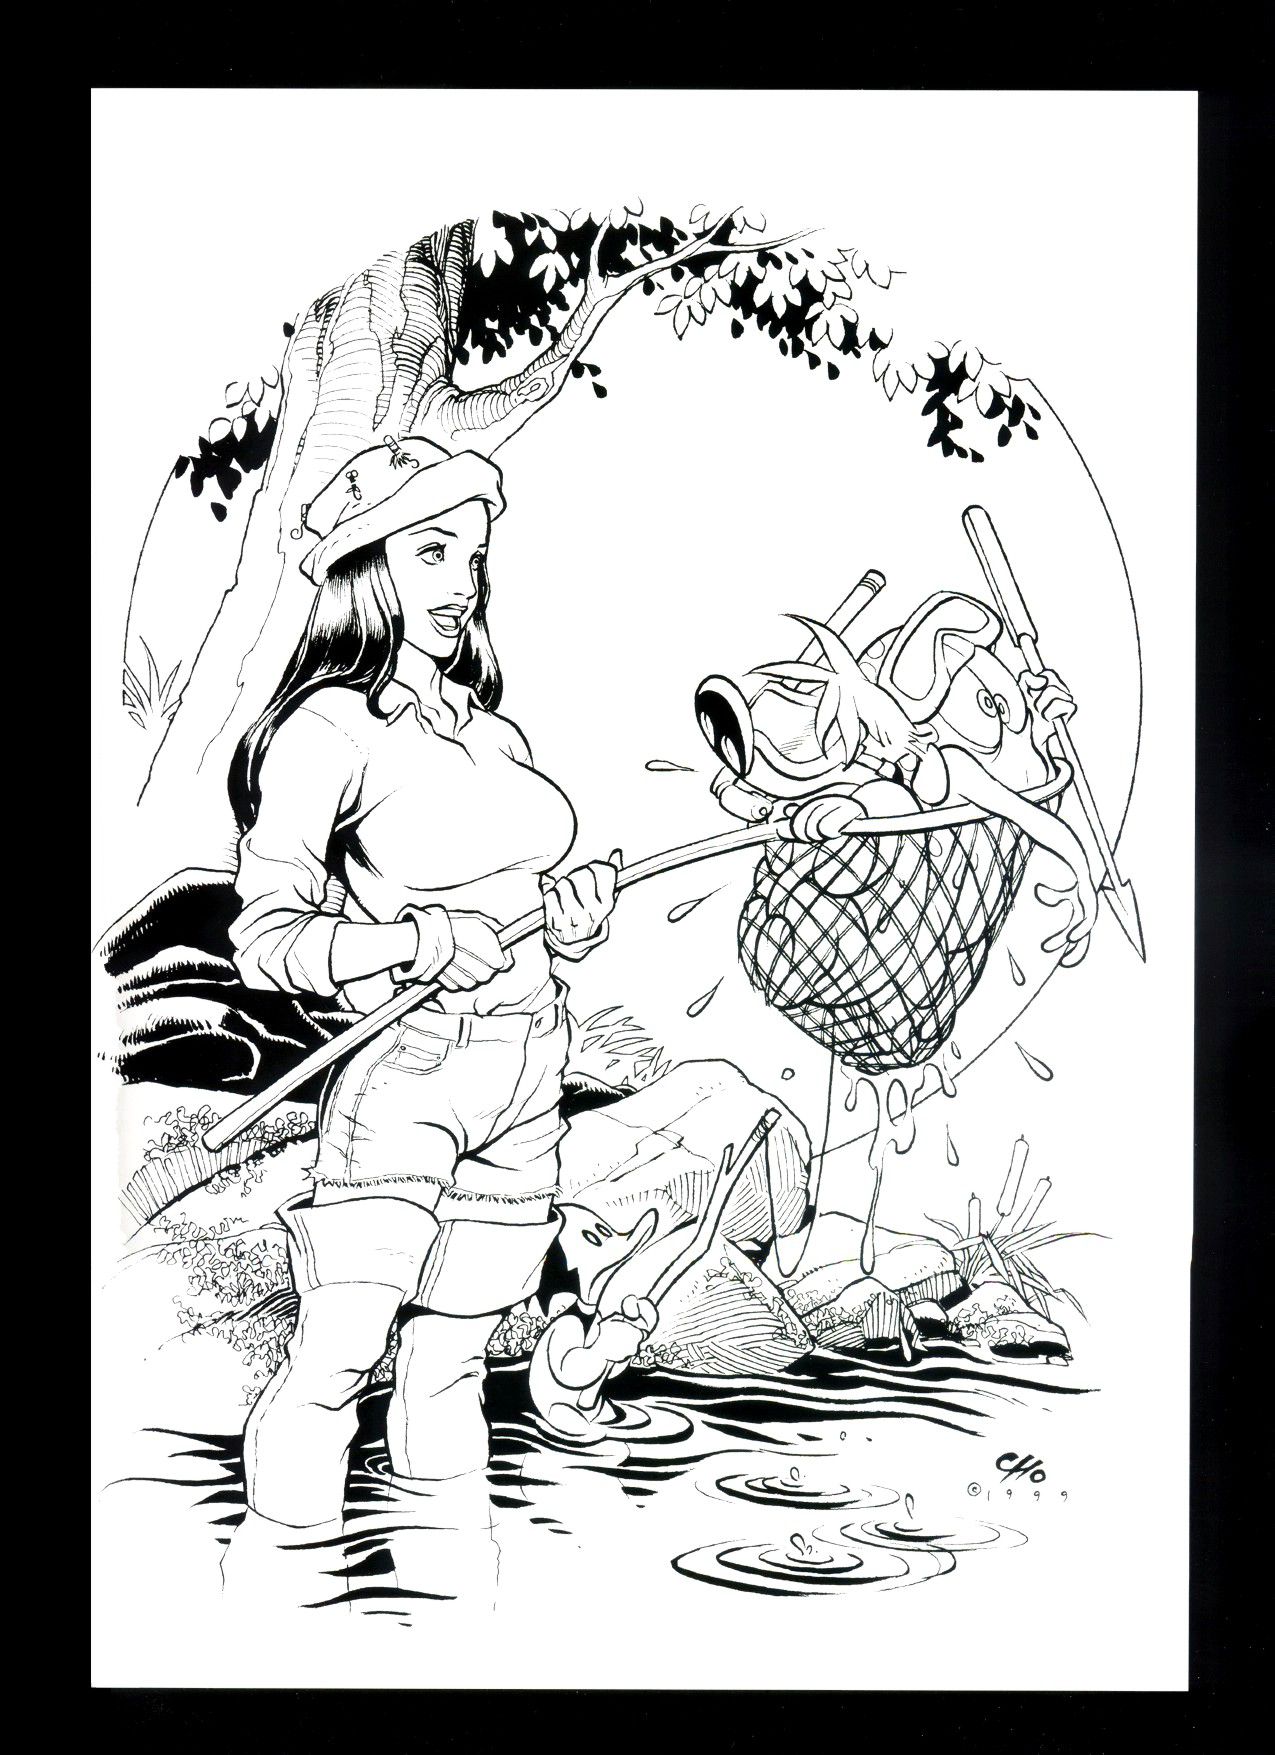 [Frank Cho] Women - Selected Drawings and Illustrations 72